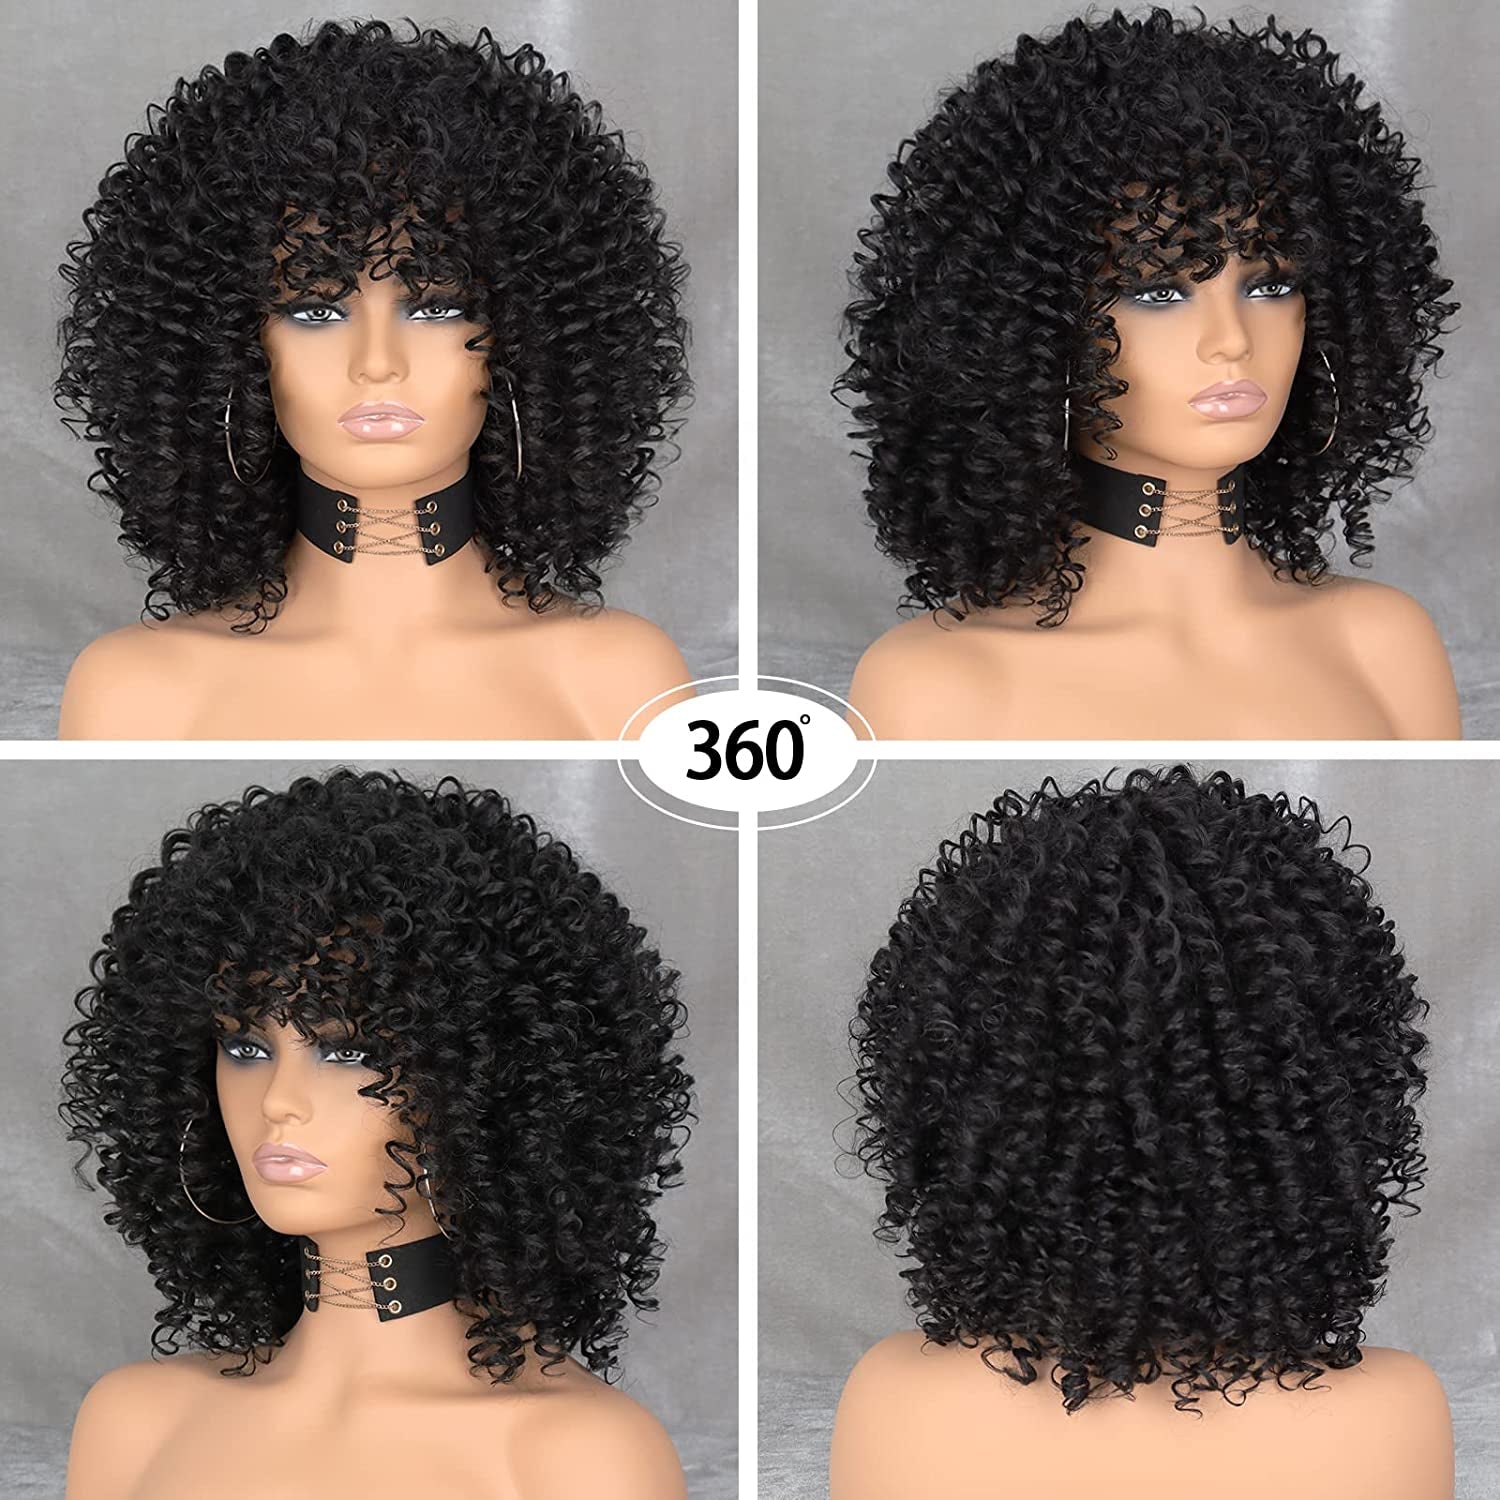 Xinran Black Curly Afro Wig for Women, Kinky Black Curly Wigs for Women, Natural Synthetic Curly Wig with Bangs